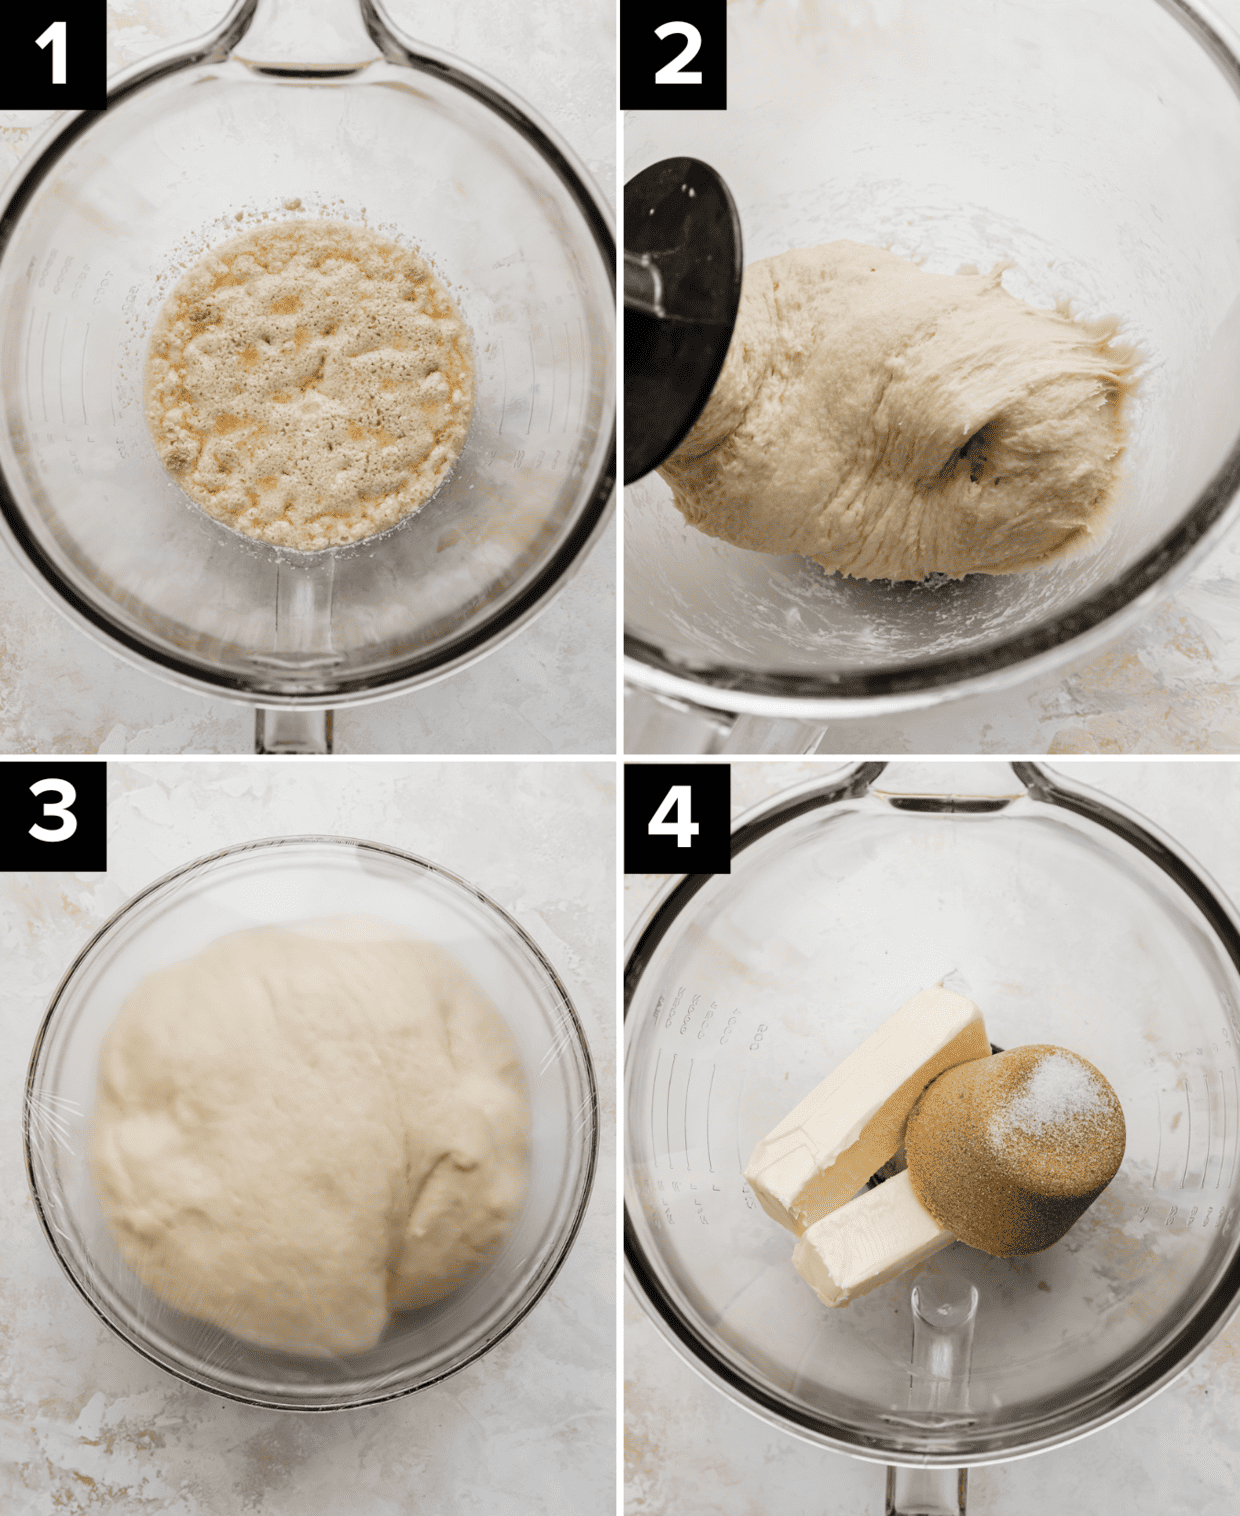 Four images showing the making of a sweet dough used for Pecan Sticky Buns, top left is bubbly yeast in a glass bowl, top right is sweet roll dough in a glass bowl, bottom left is sweet roll dough in a glass bowl, bottom right image is butter and brown sugar in a glass bowl.